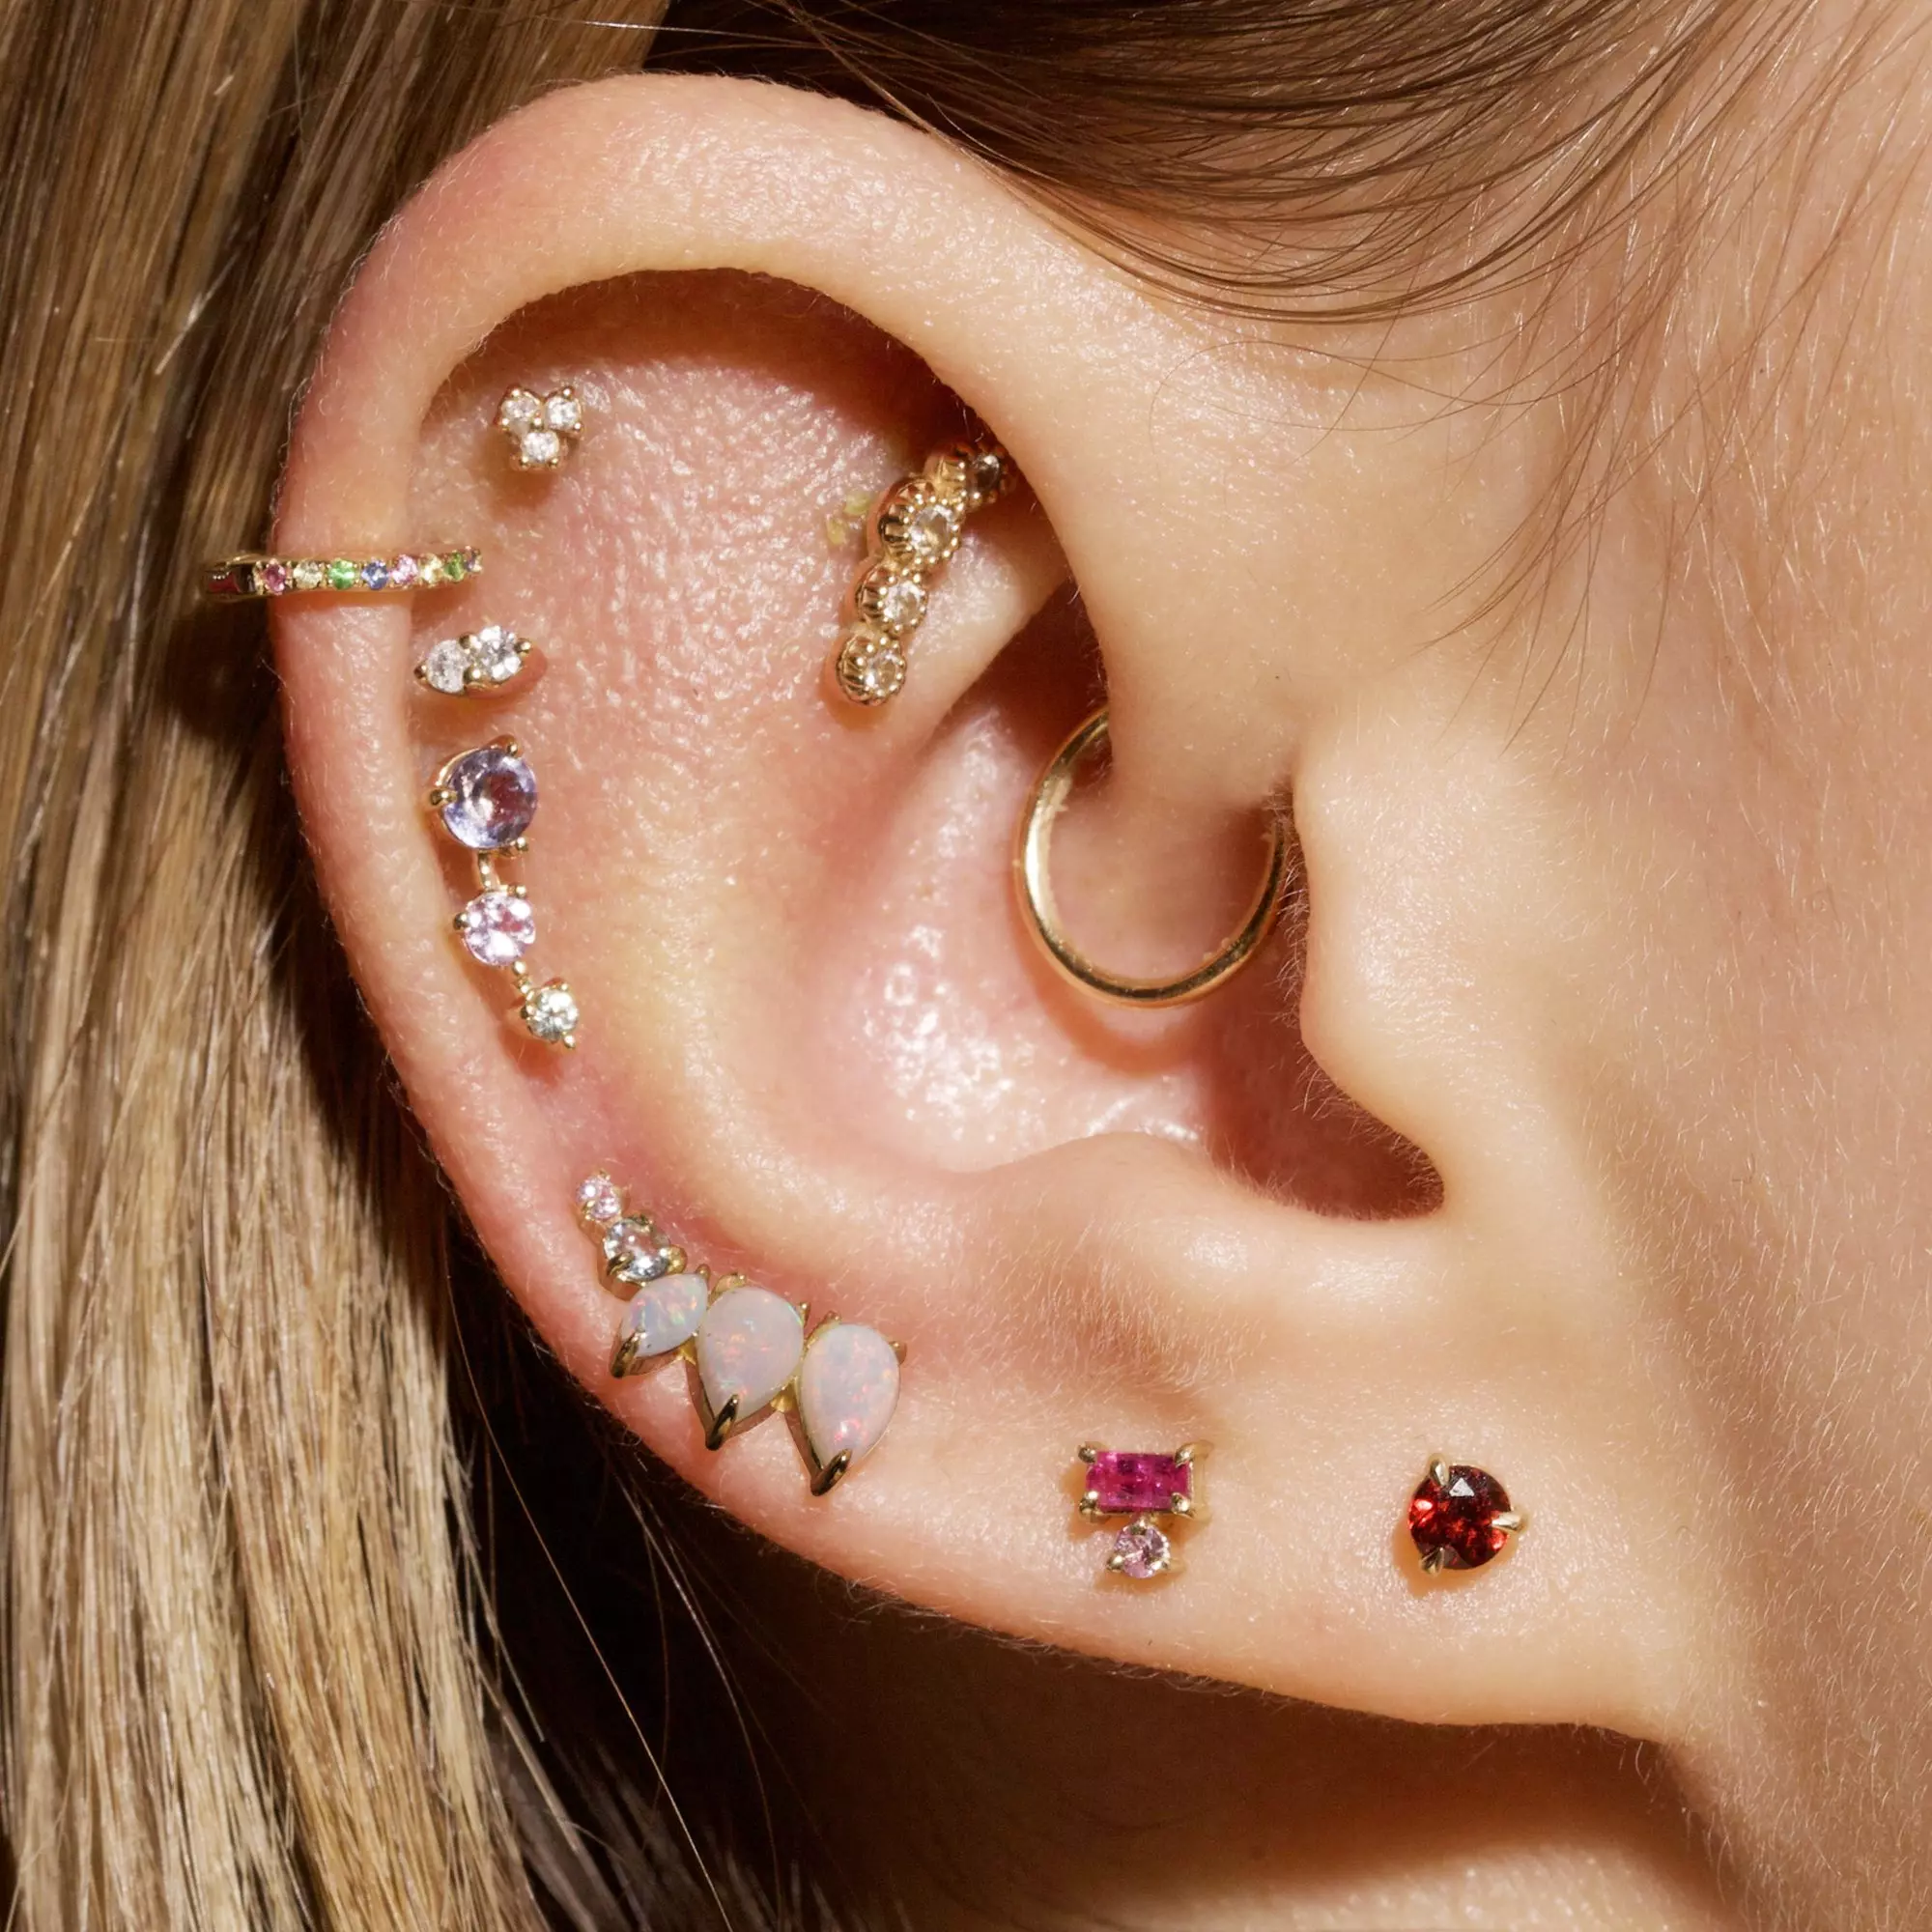 10 Different Types Of Ear Piercing In Fashion | NSNBC